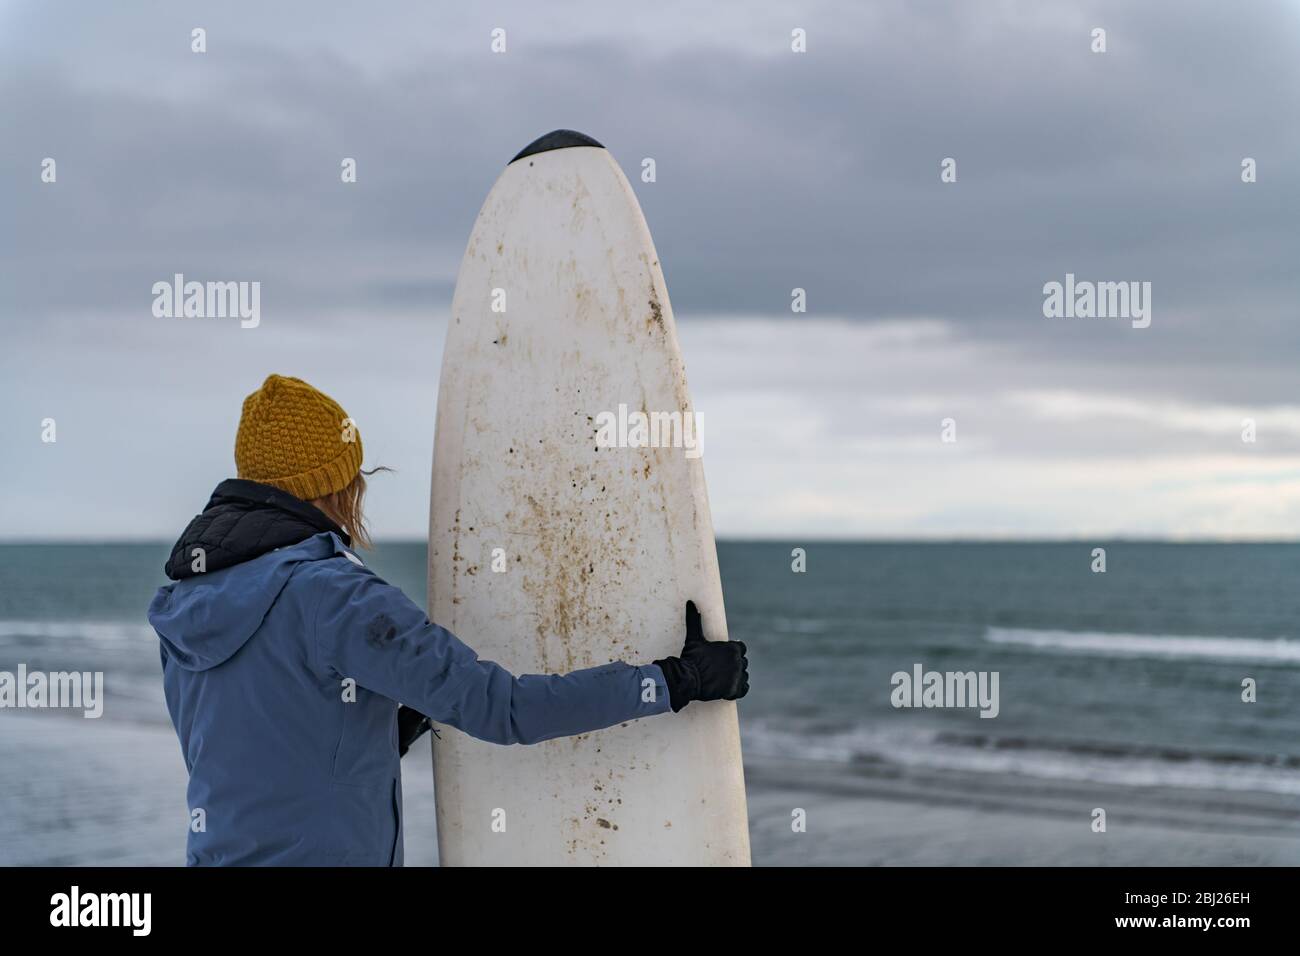 Rear view of a woman holding a surfboard standing on a snowy beach and looking out to sea. Stock Photo